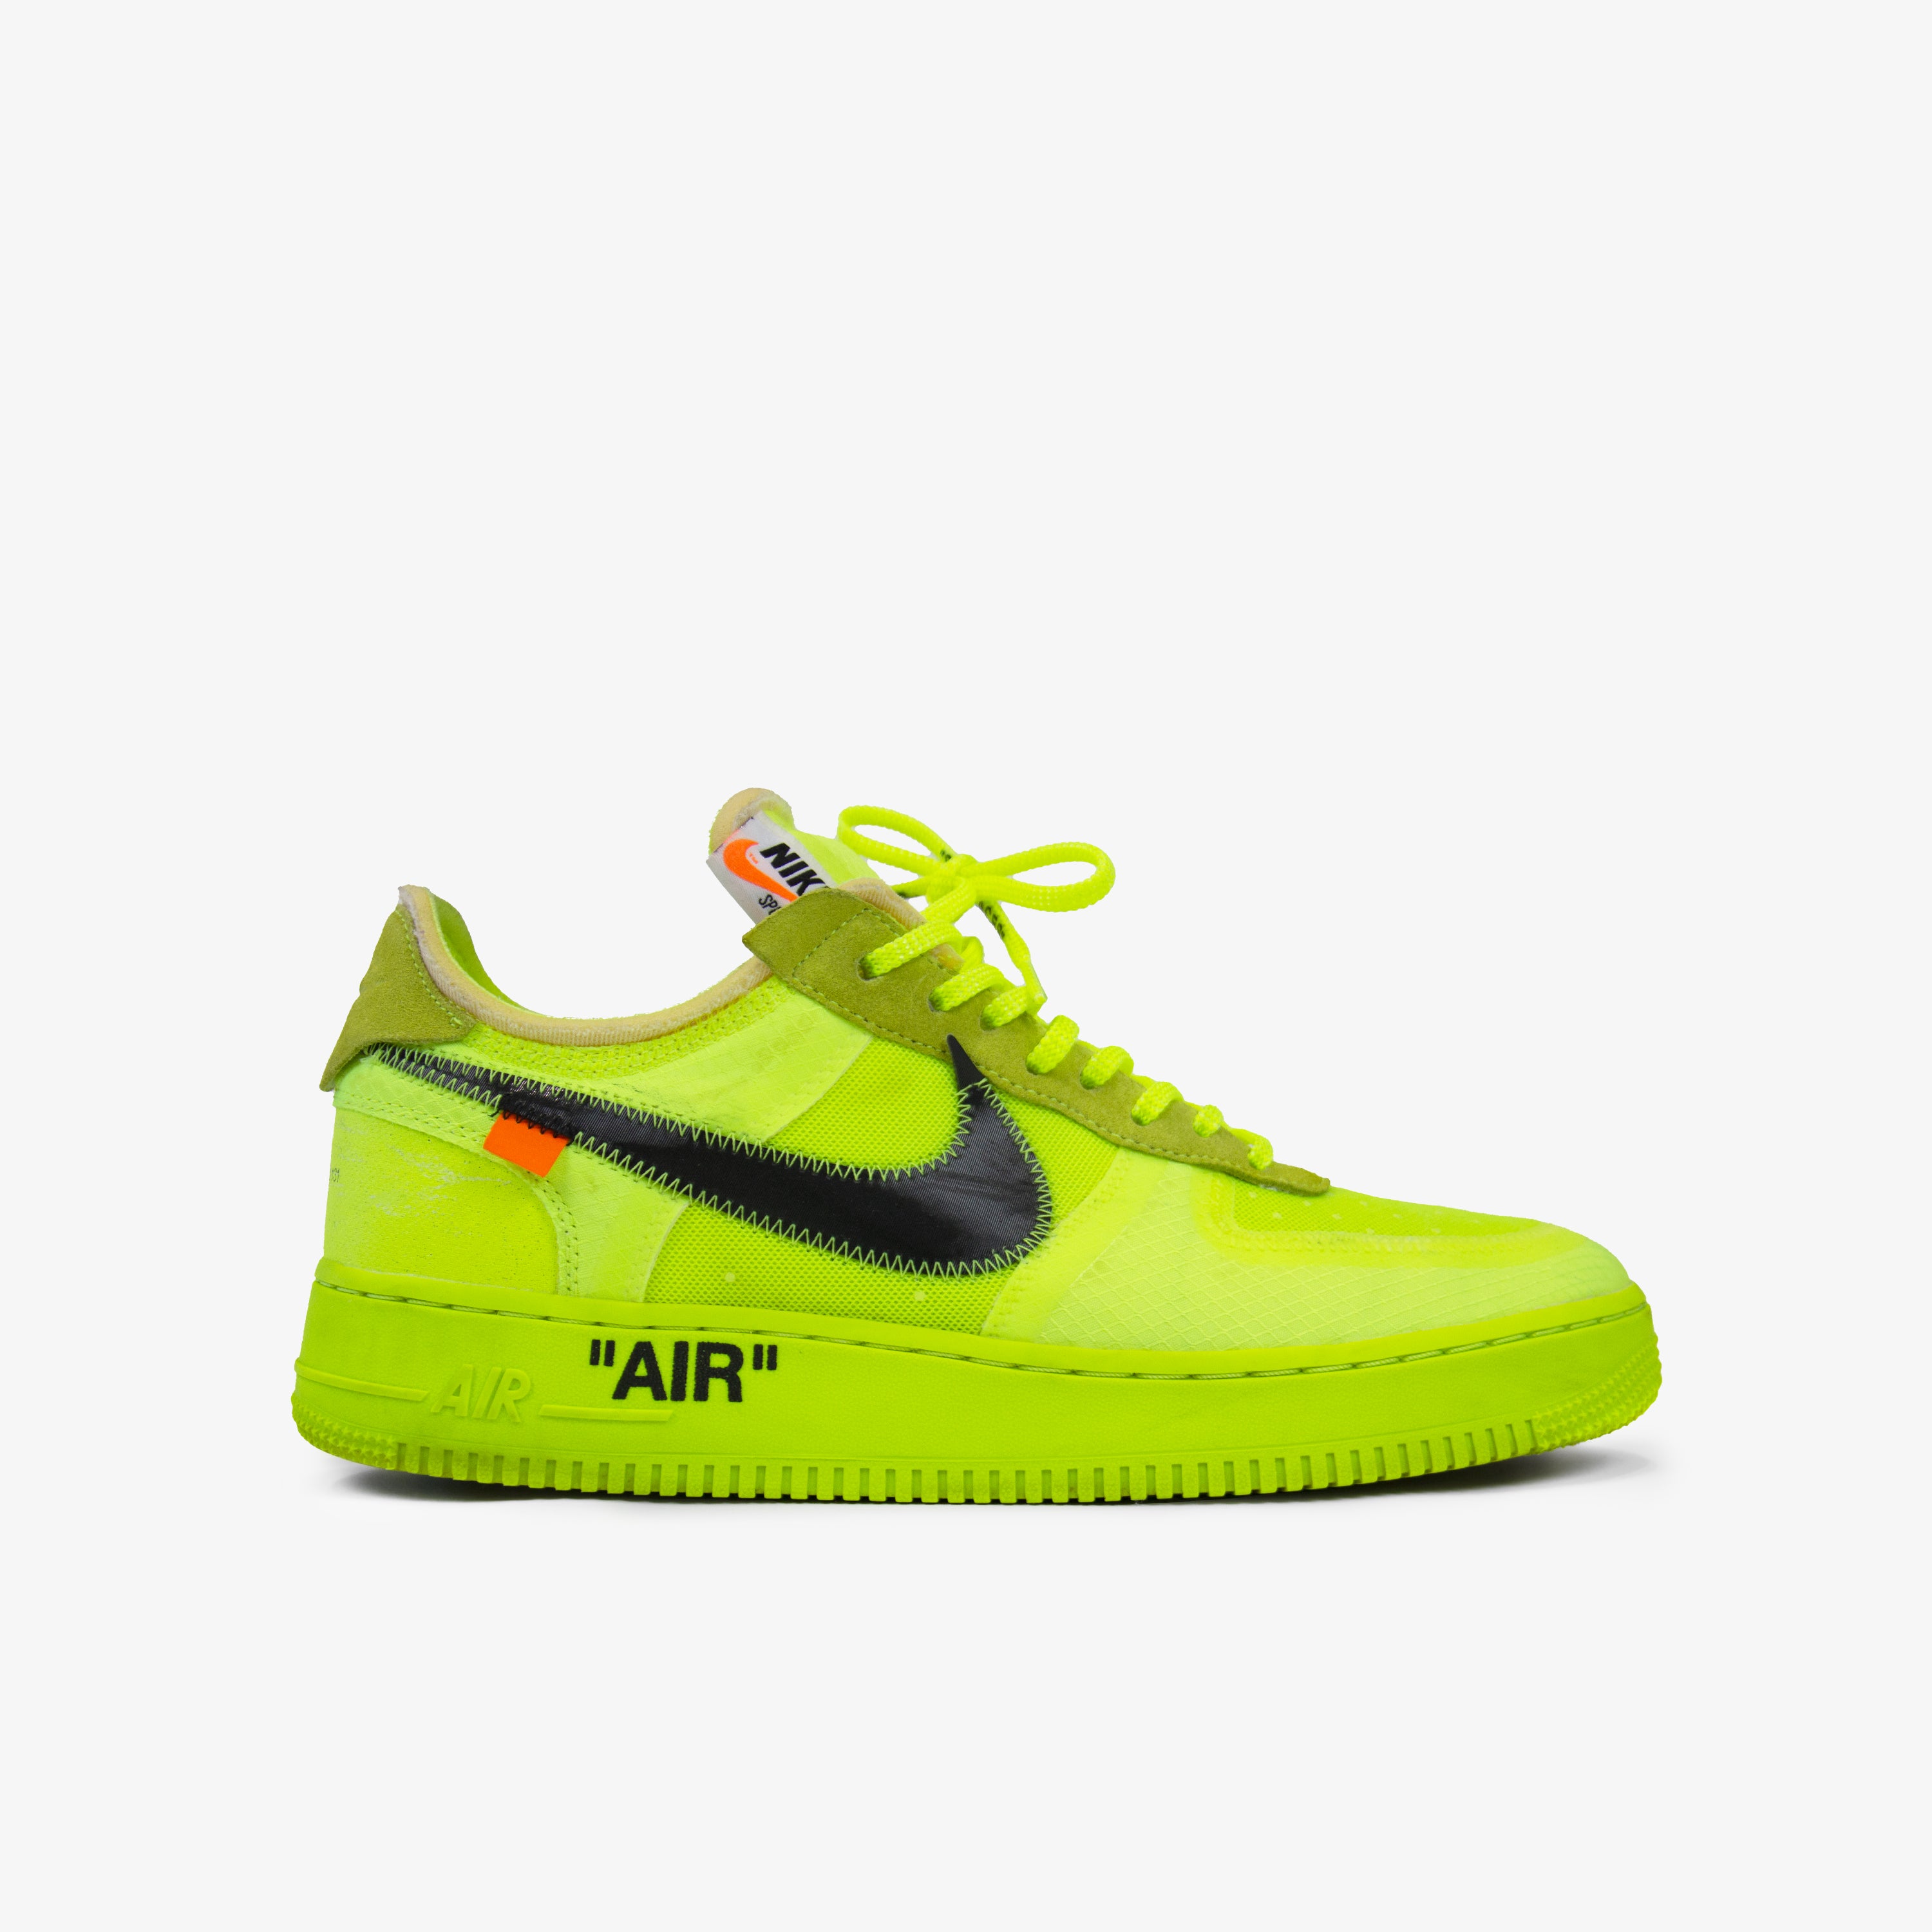 OFF-WHITE NIKE AIR FORCE 1 LOW VOLT